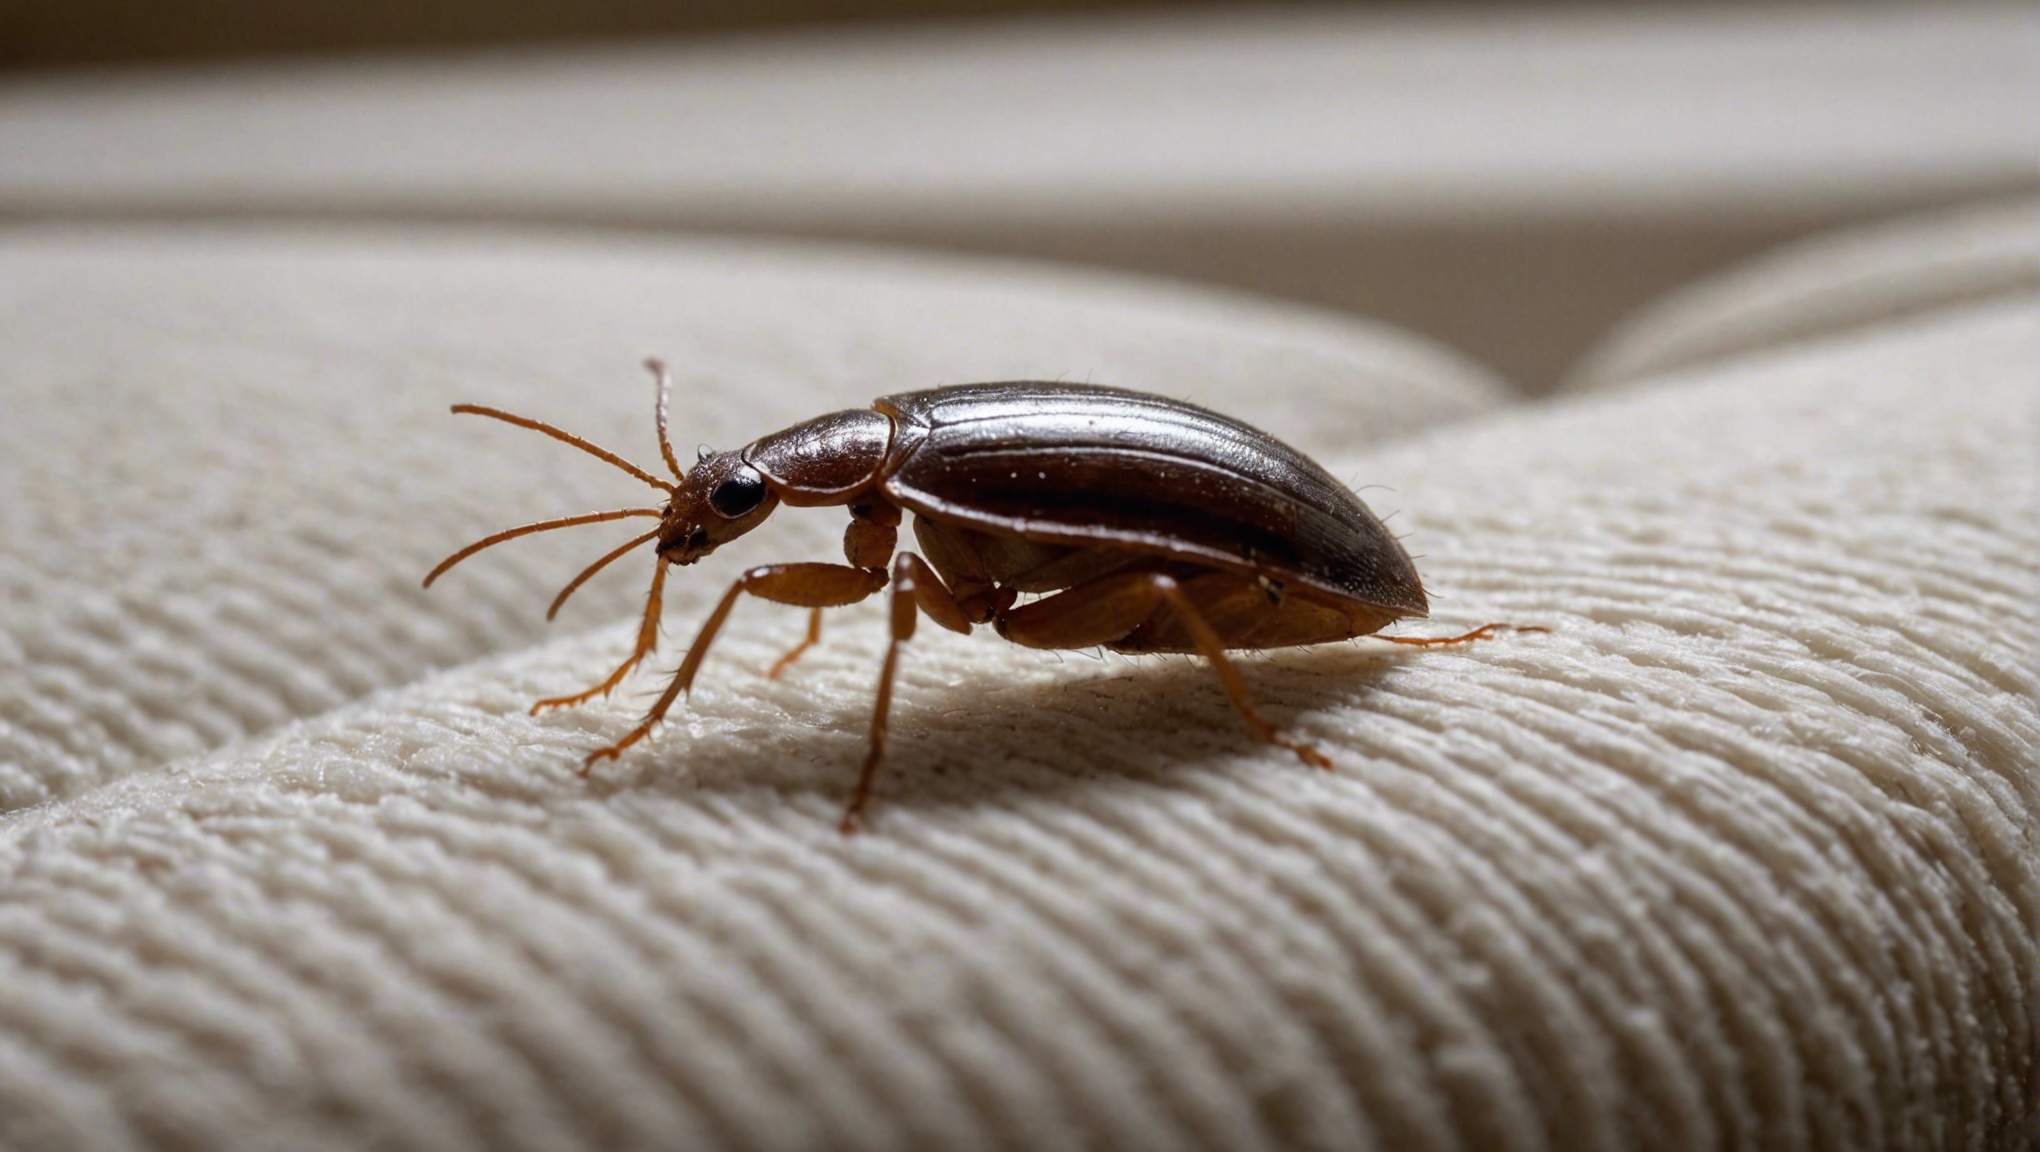 learn effective methods to avoid bringing bed bugs home when traveling and protect yourself from infestations with these tips.